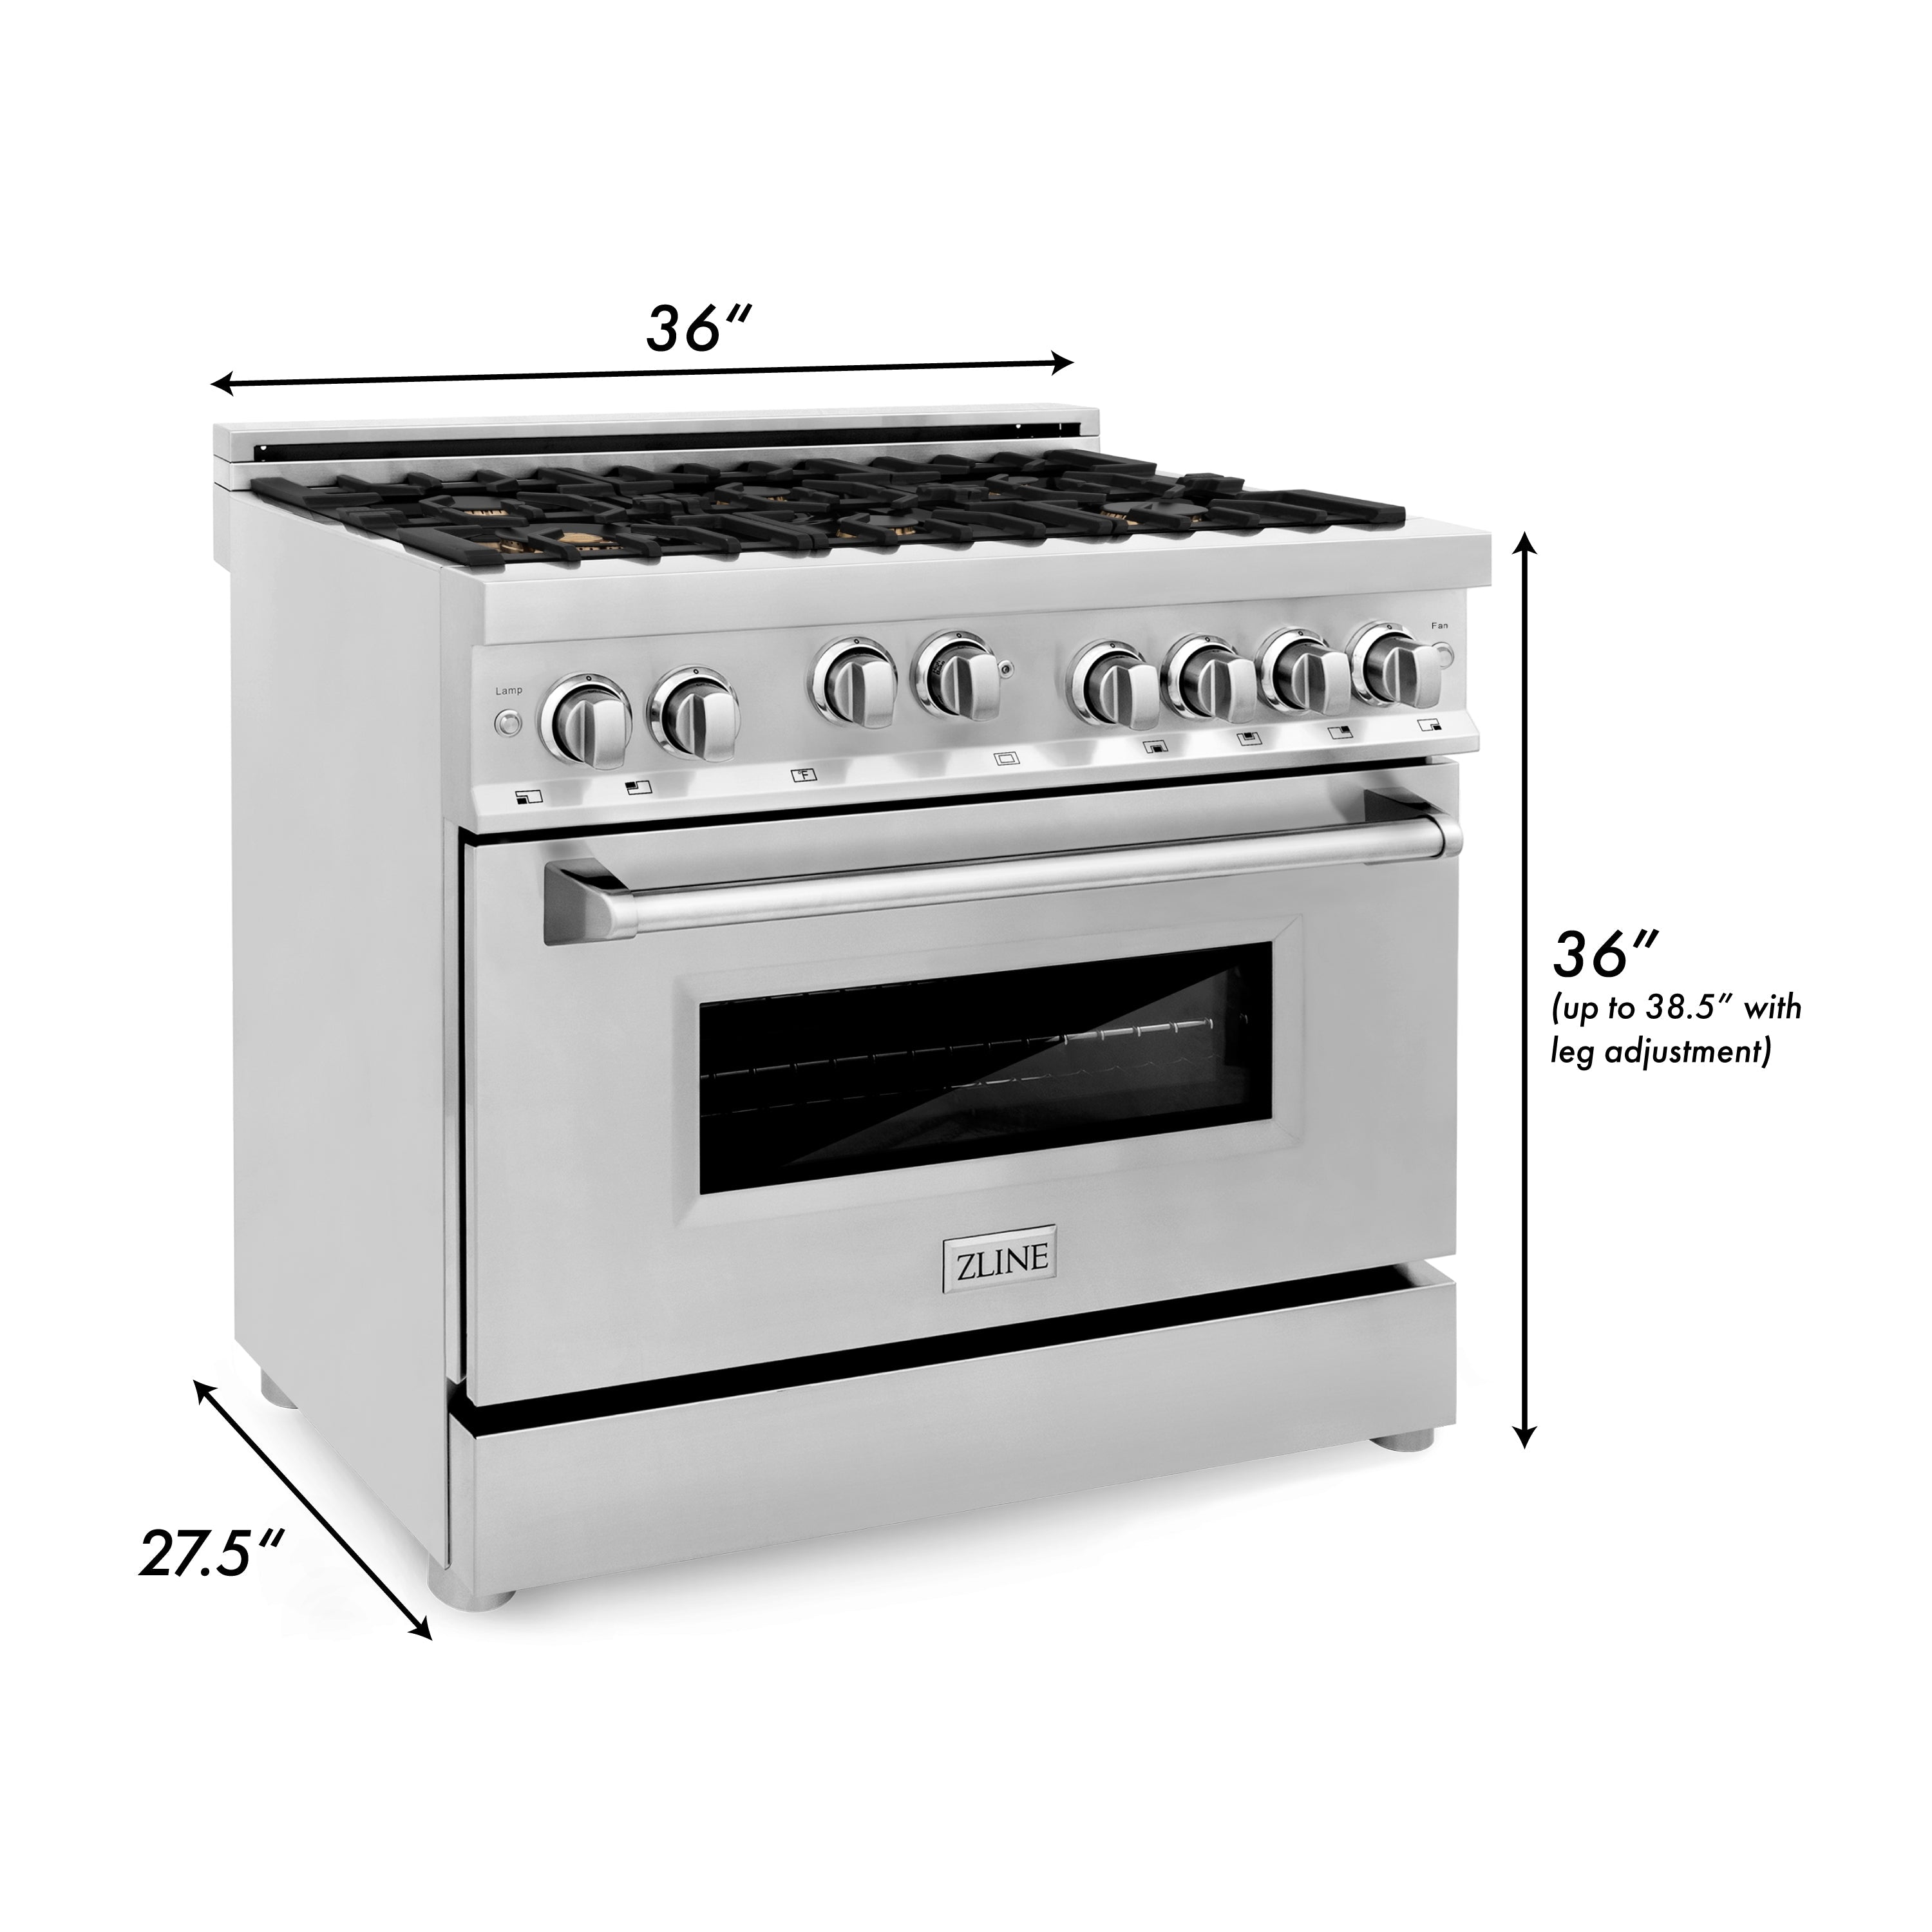 ZLINE 36 in. 4.6 cu. ft. Gas Oven and Gas Cooktop Range with Griddle and Brass Burners in Stainless Steel (RG-BR-GR-36)